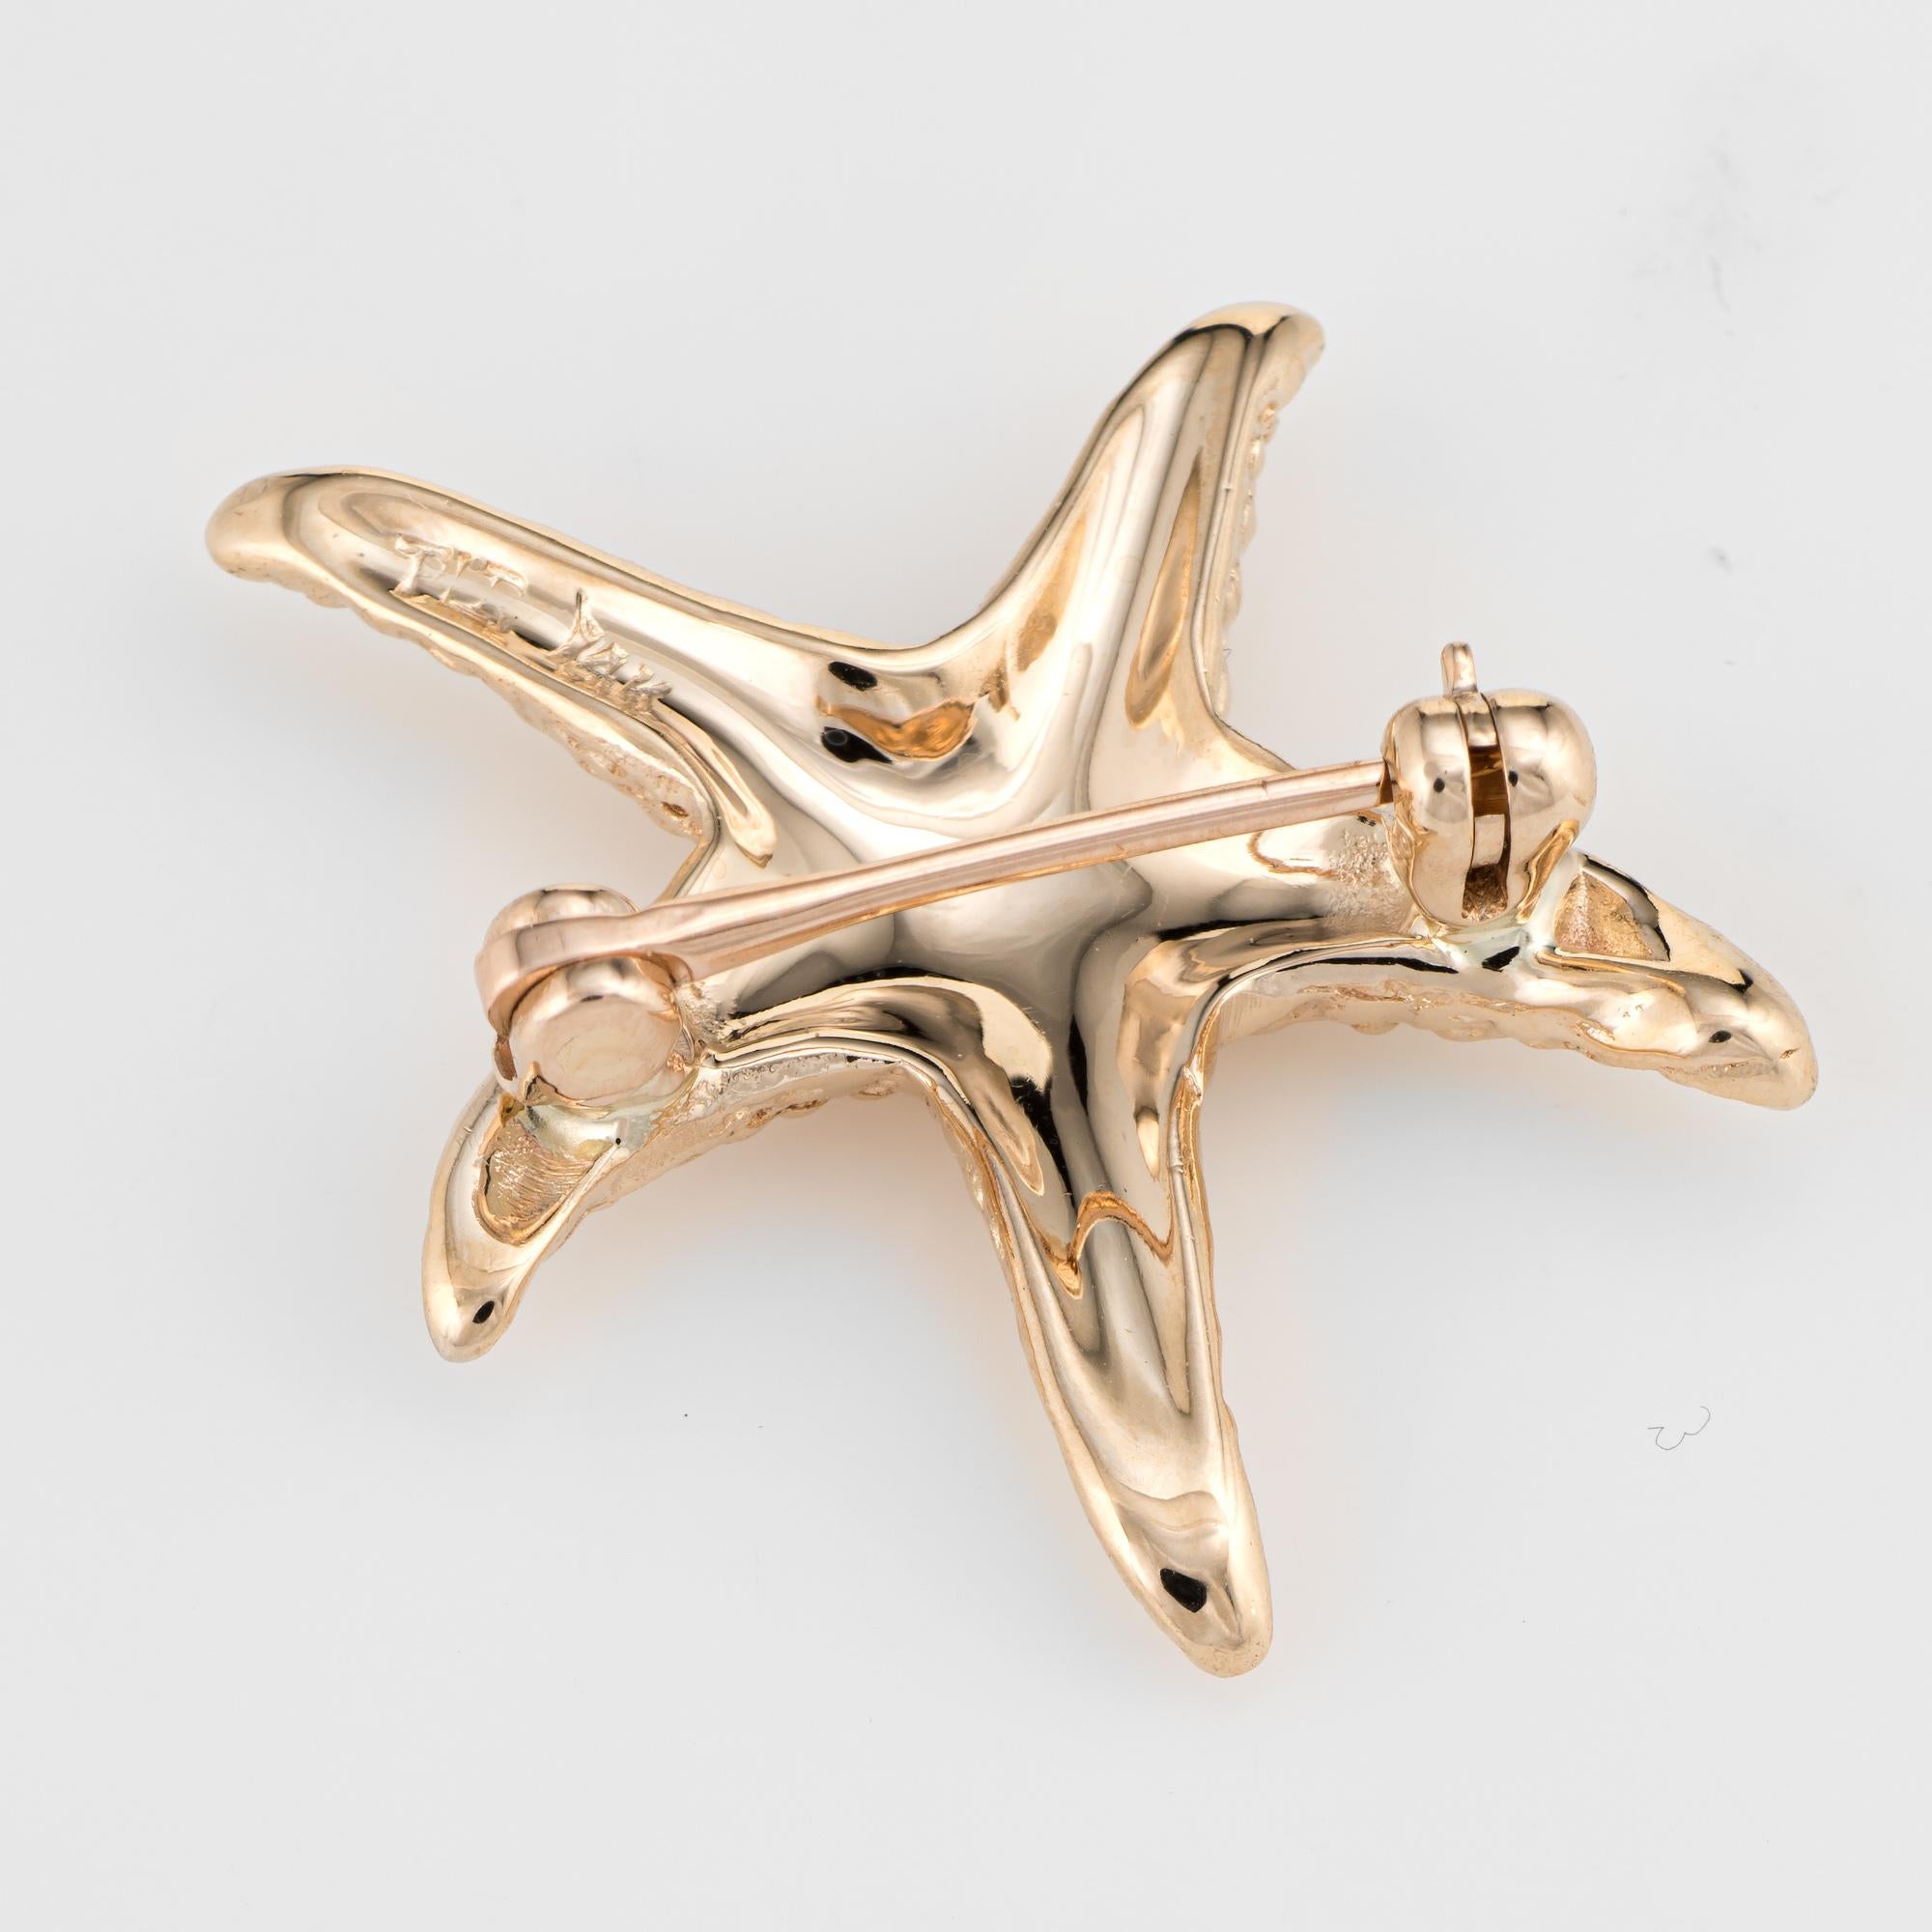 Charming starfish brooch crafted in 14 karat yellow gold. 

The starfish features a textured lifelike design. A charming piece to wear on a lapel or pinned to your clothing (I like to pin on a shirt cuff for a different look). 

The brooch is in